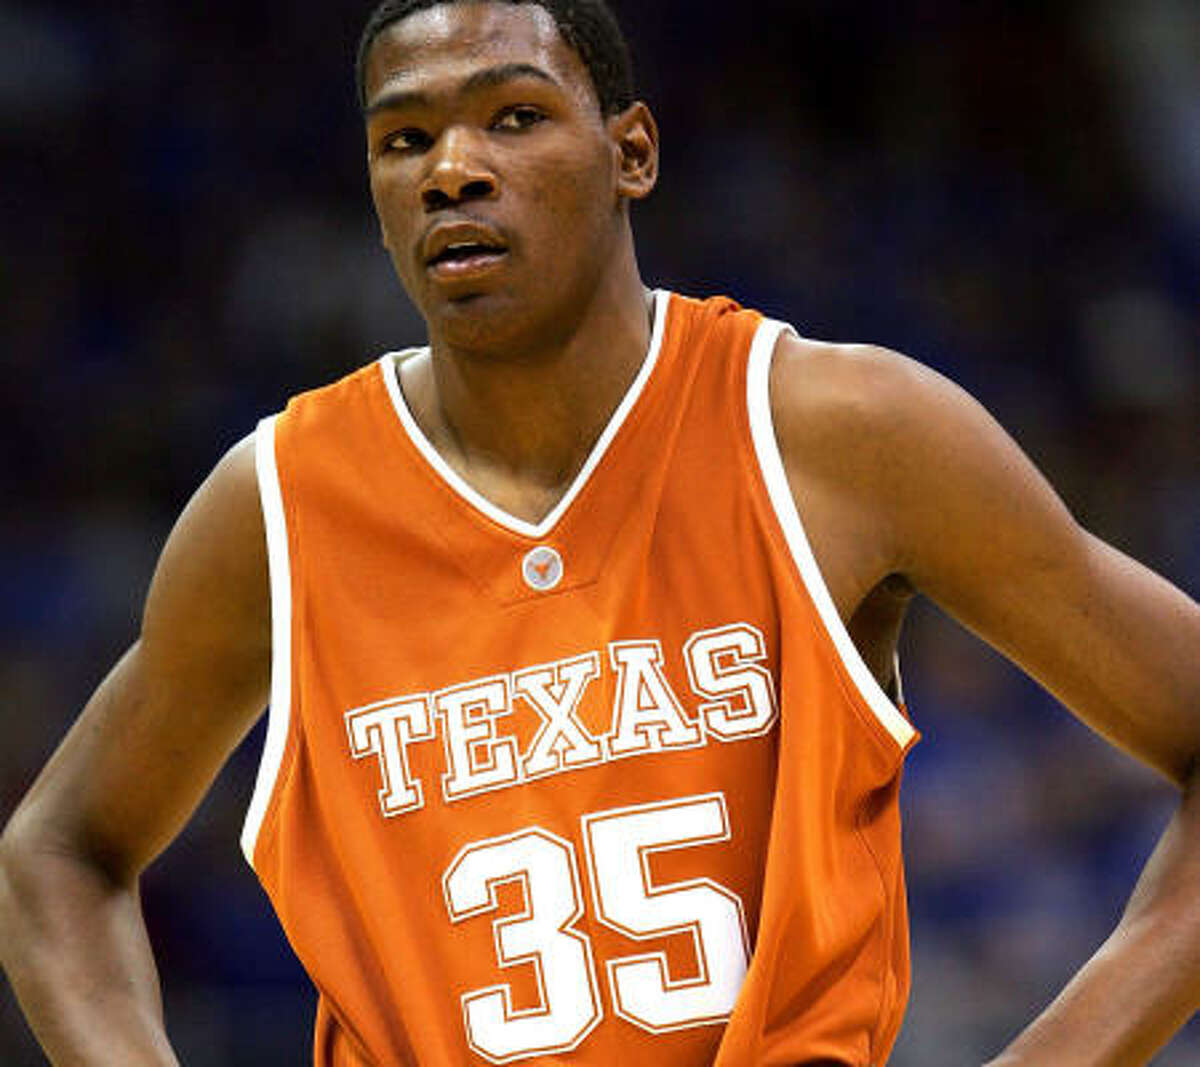 durant texas jersey